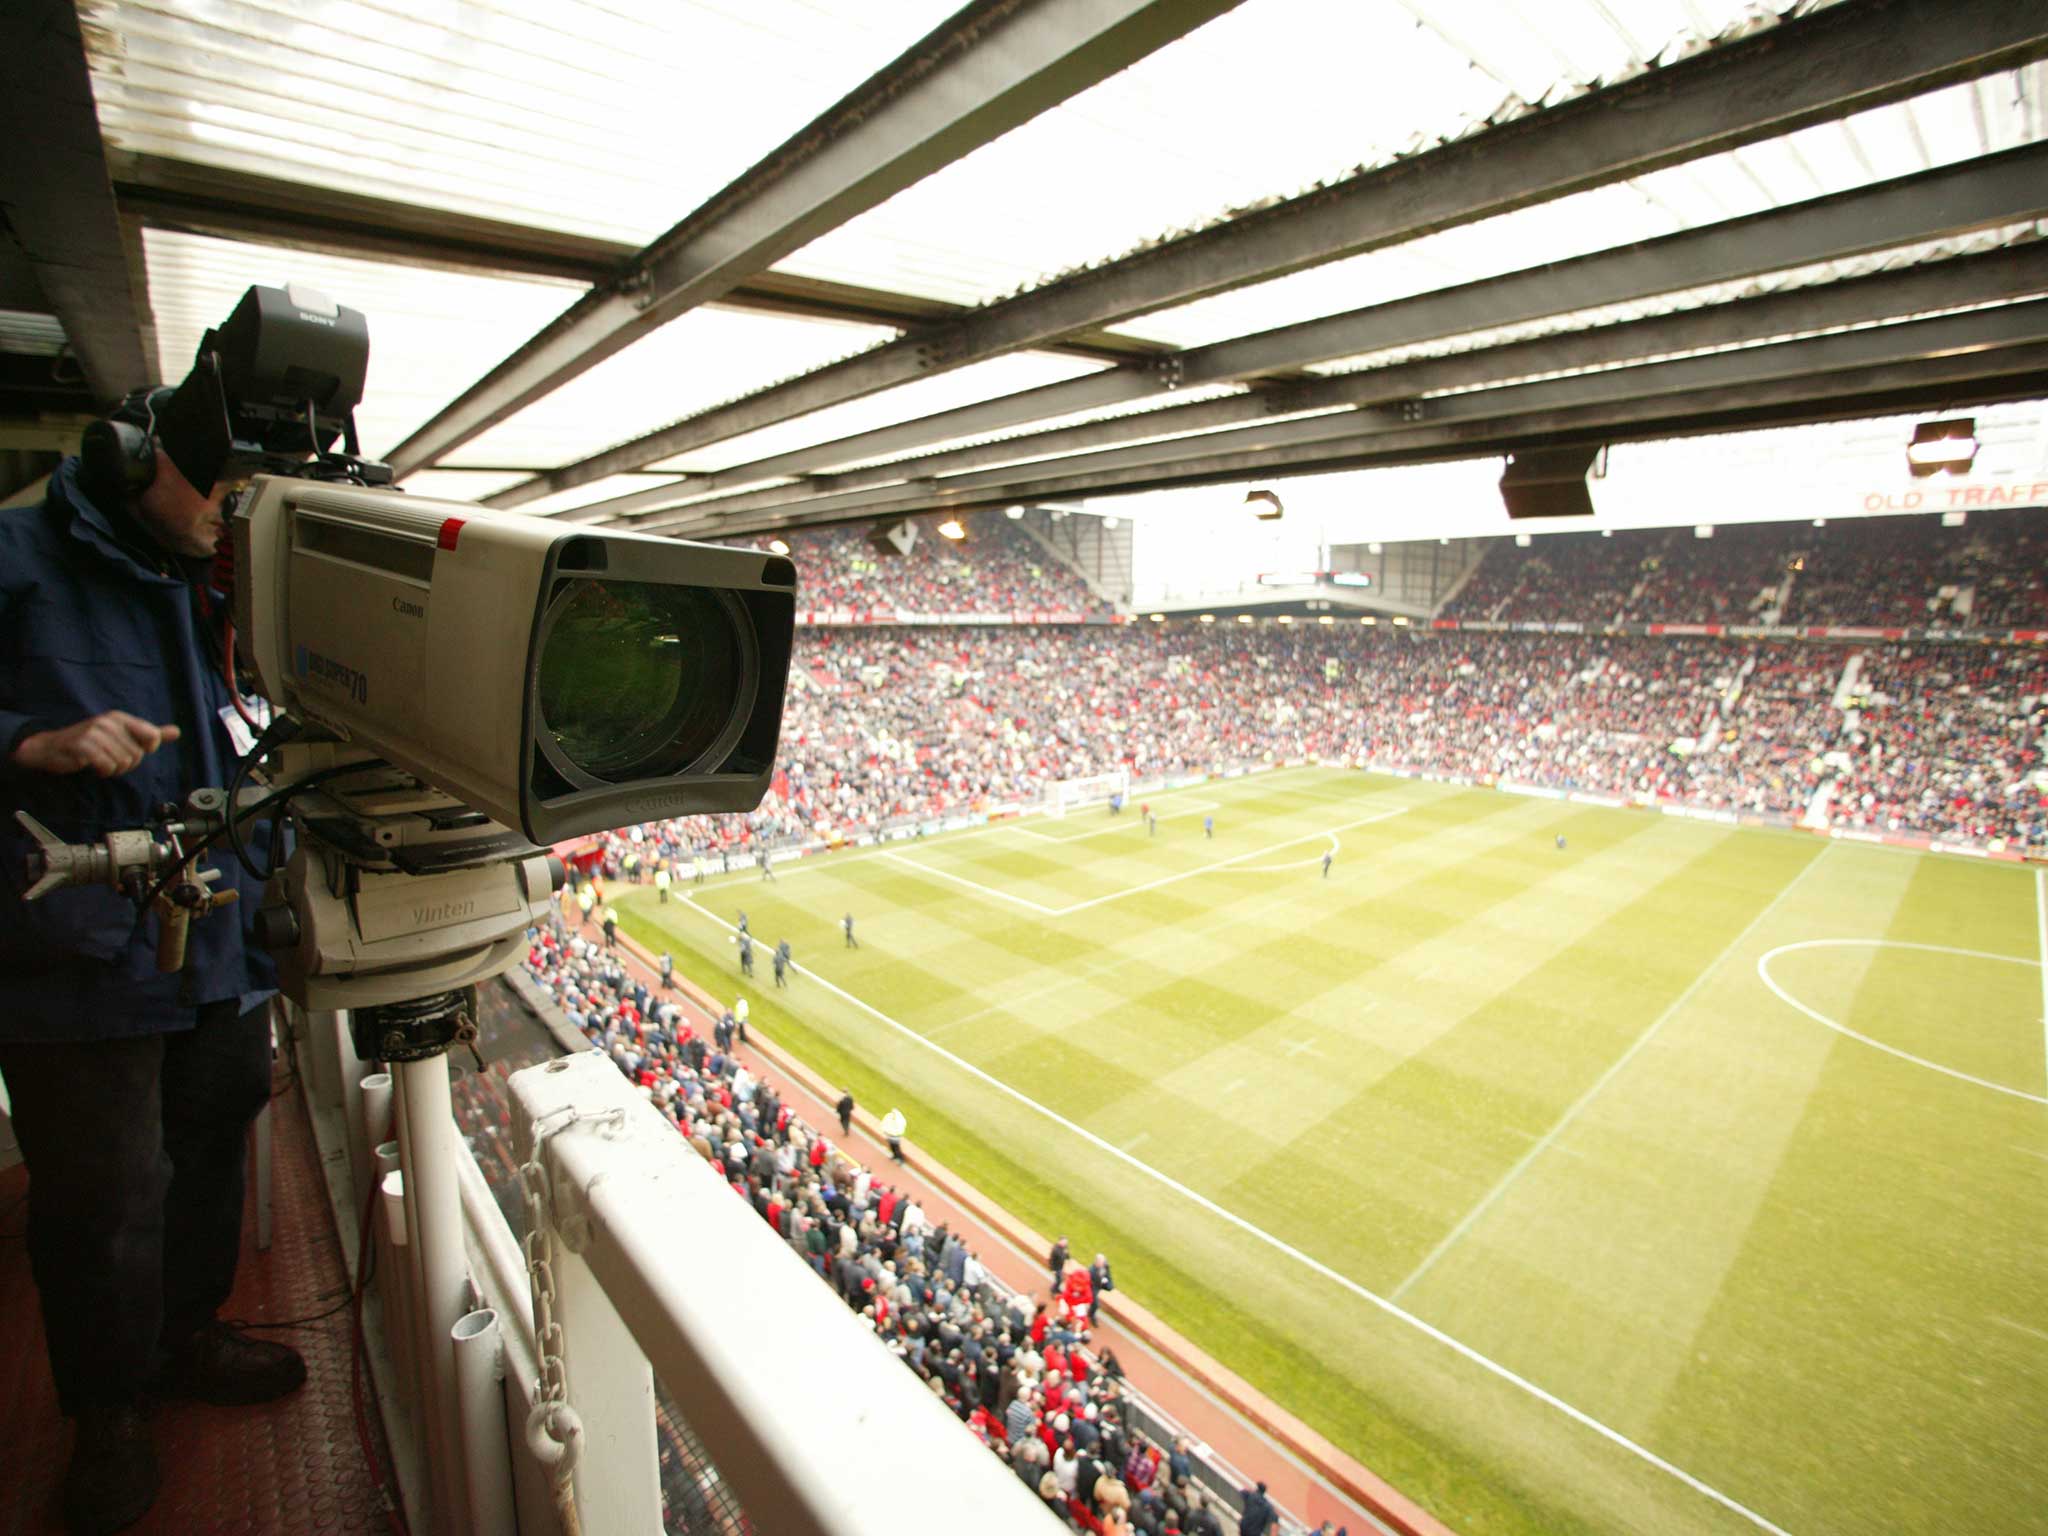 Sky TV has transformed English football in the last 20 years